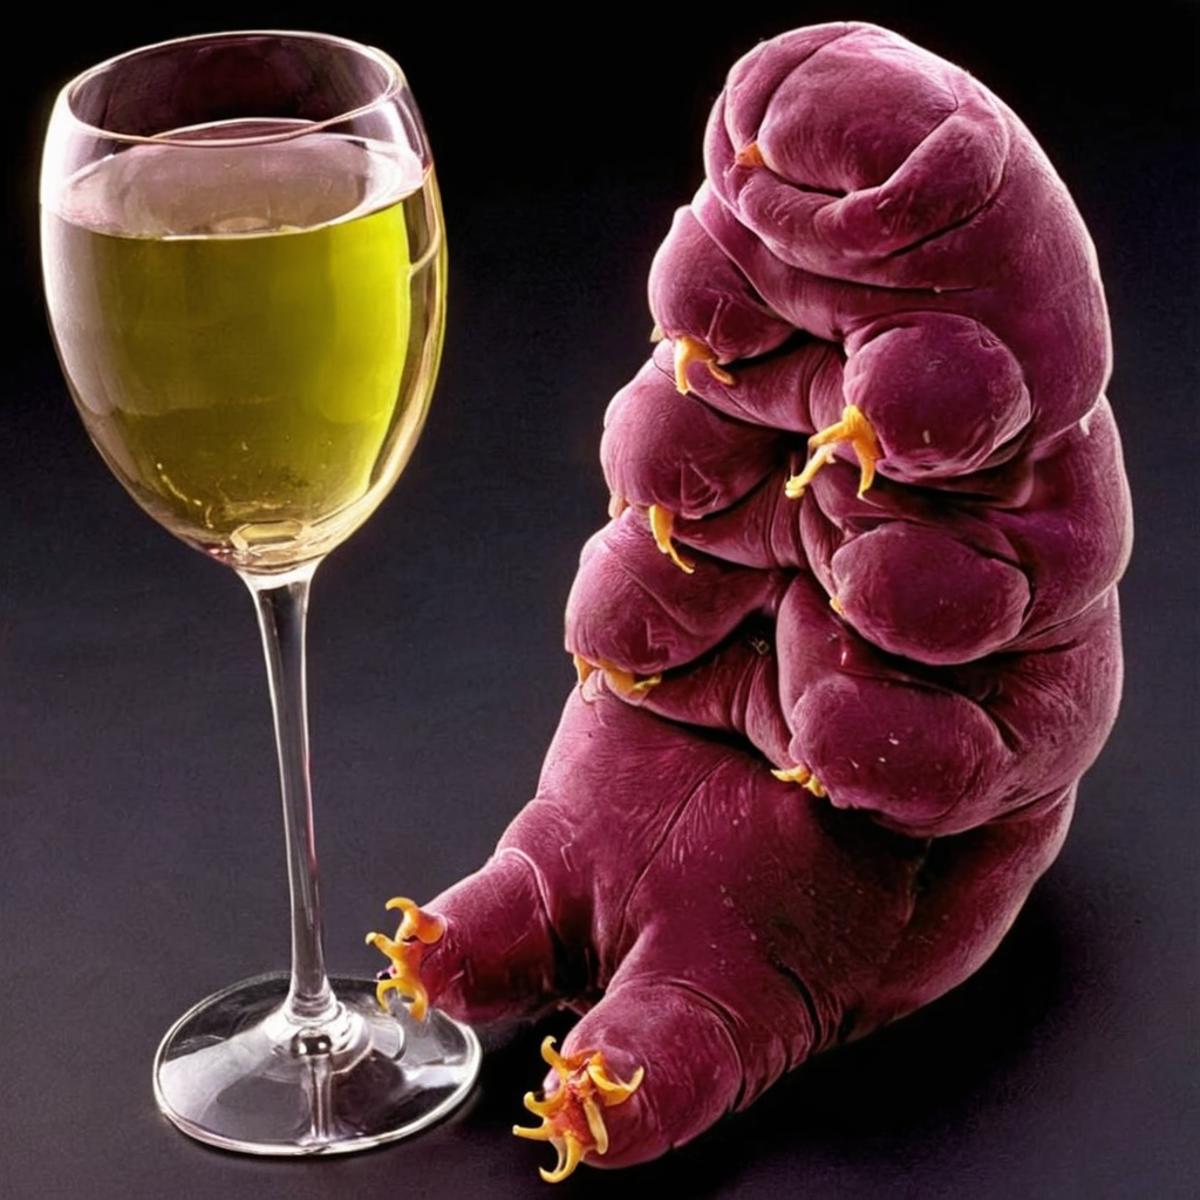 A purple creature with a glass of wine.